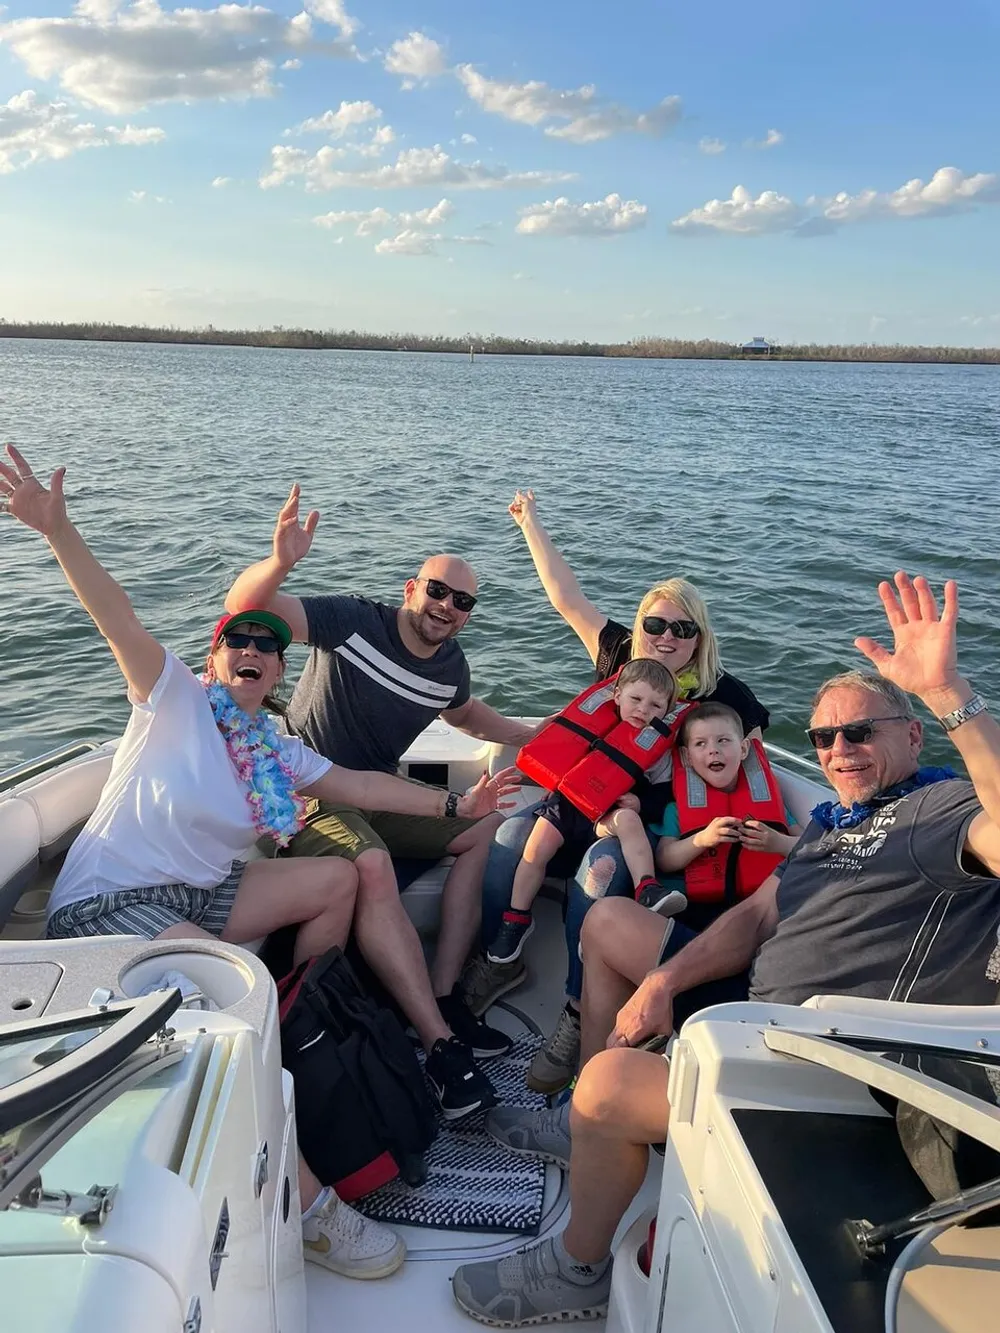 A group of six joyful people are having a good time on a boat with some of them raising their arms in the air against a backdrop of calm waters and a clear sky